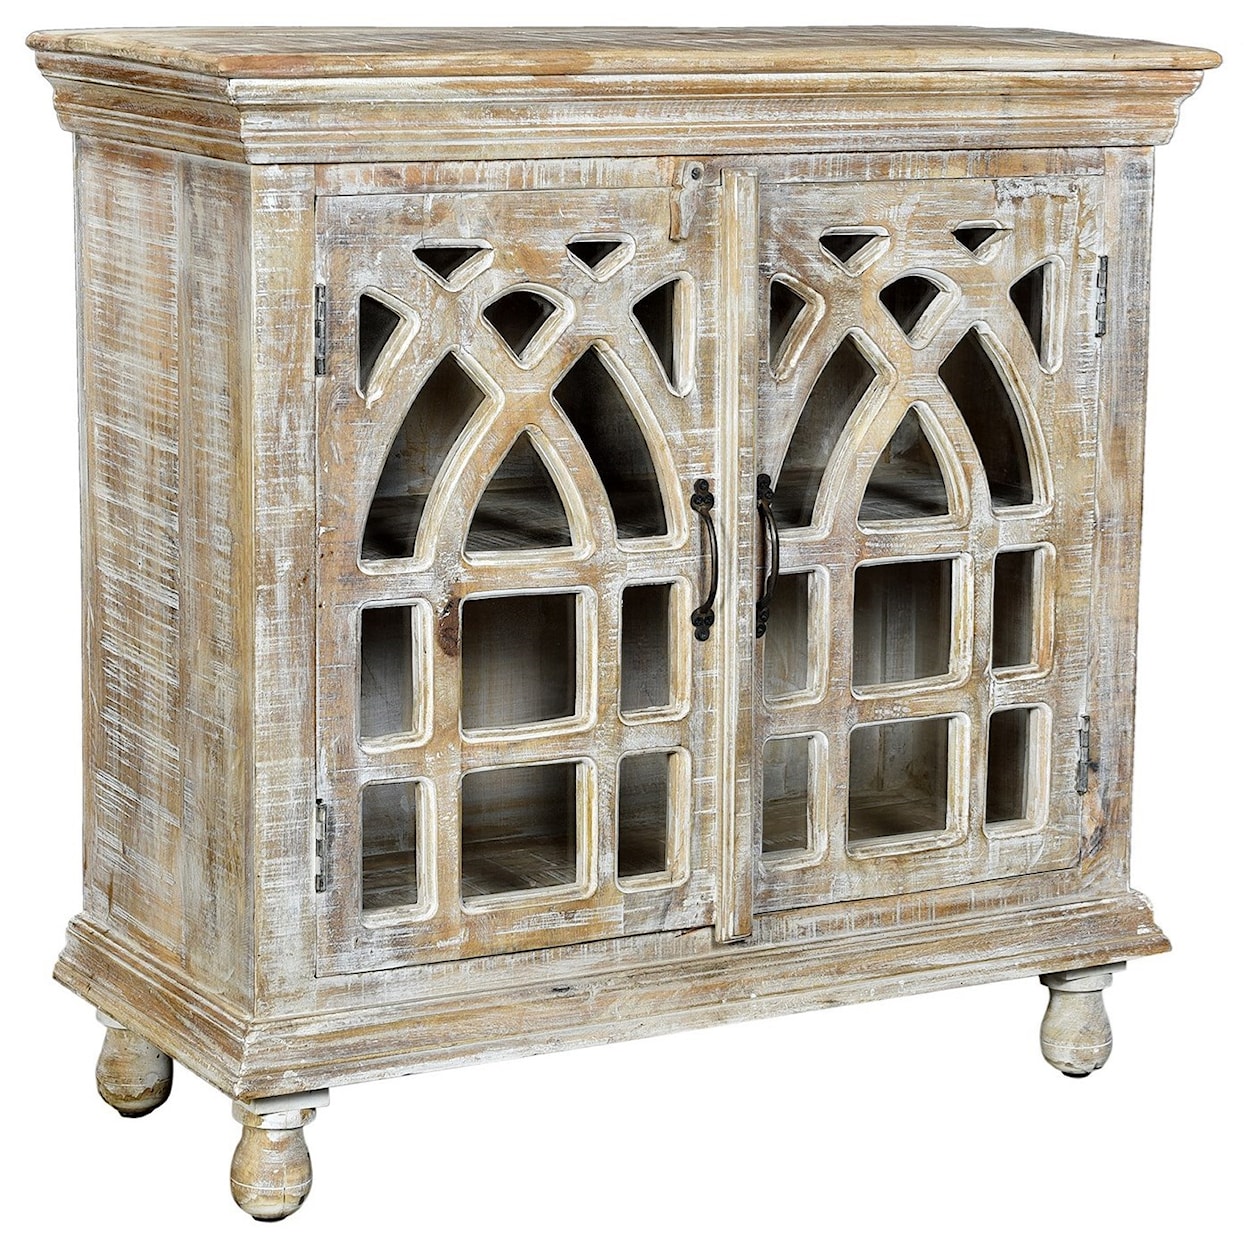 Crestview Collection Accent Furniture Bengal Manor Light Mango Wood Cabinet